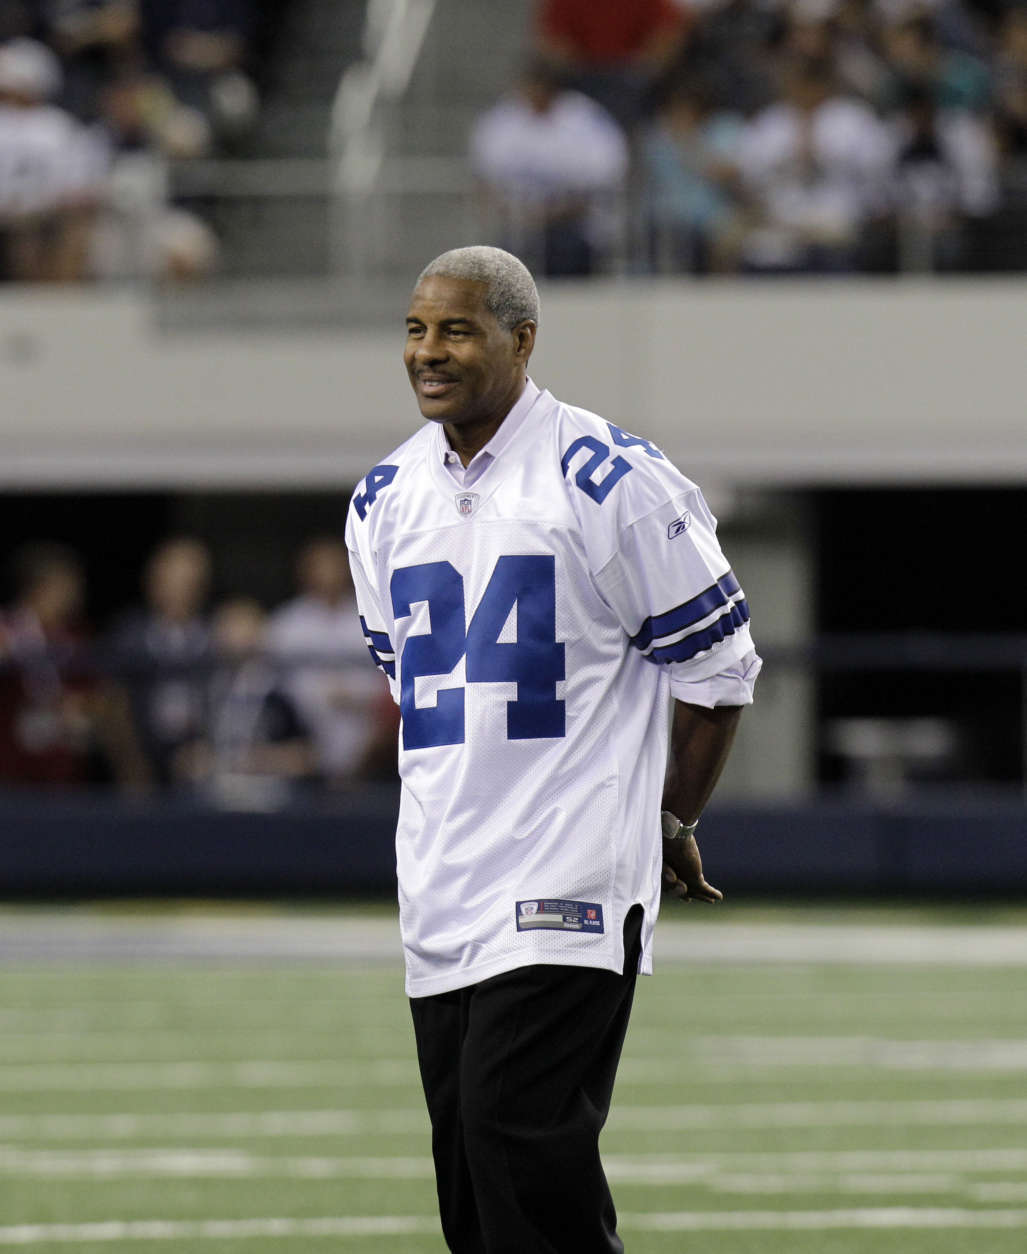 Former Dallas Cowboys player Everson Walls (24) before a preseason NFL football game against the Miami Dolphins, Thursday, Sept. 2, 2010, in Arlington, Texas. (AP Photo/LM Otero)